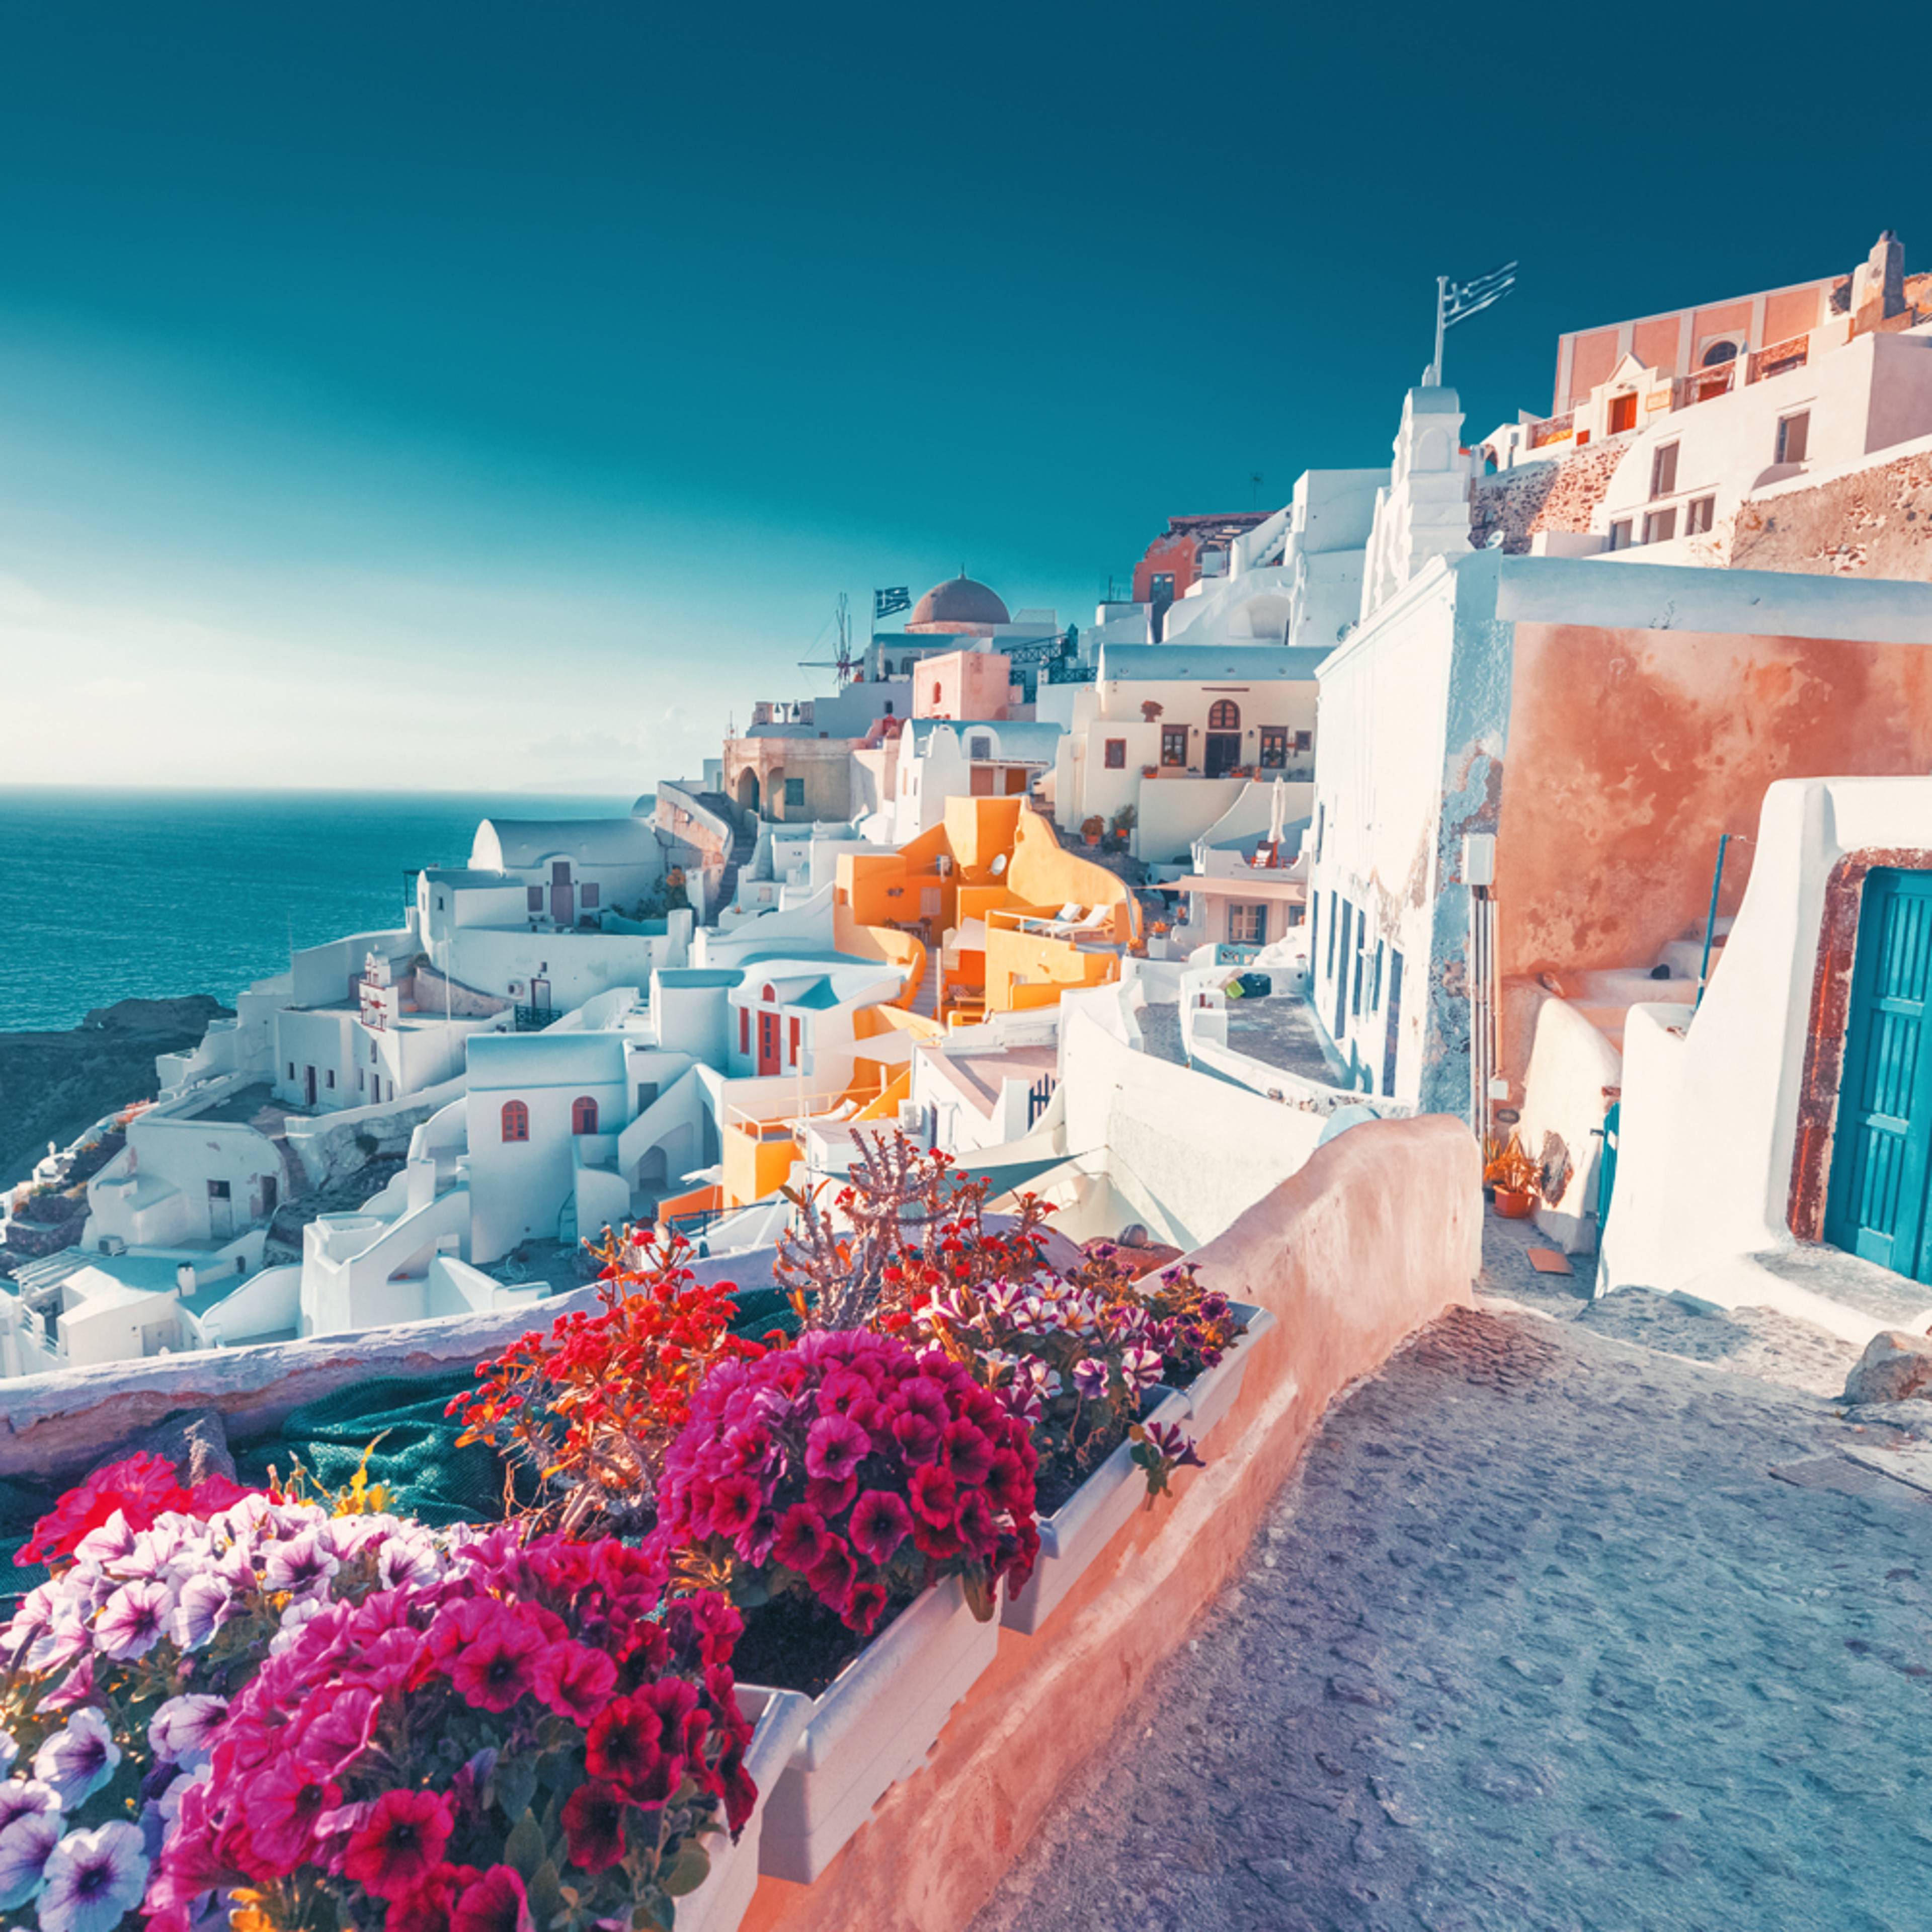 Design your perfect spring holiday in Greece with a local expert